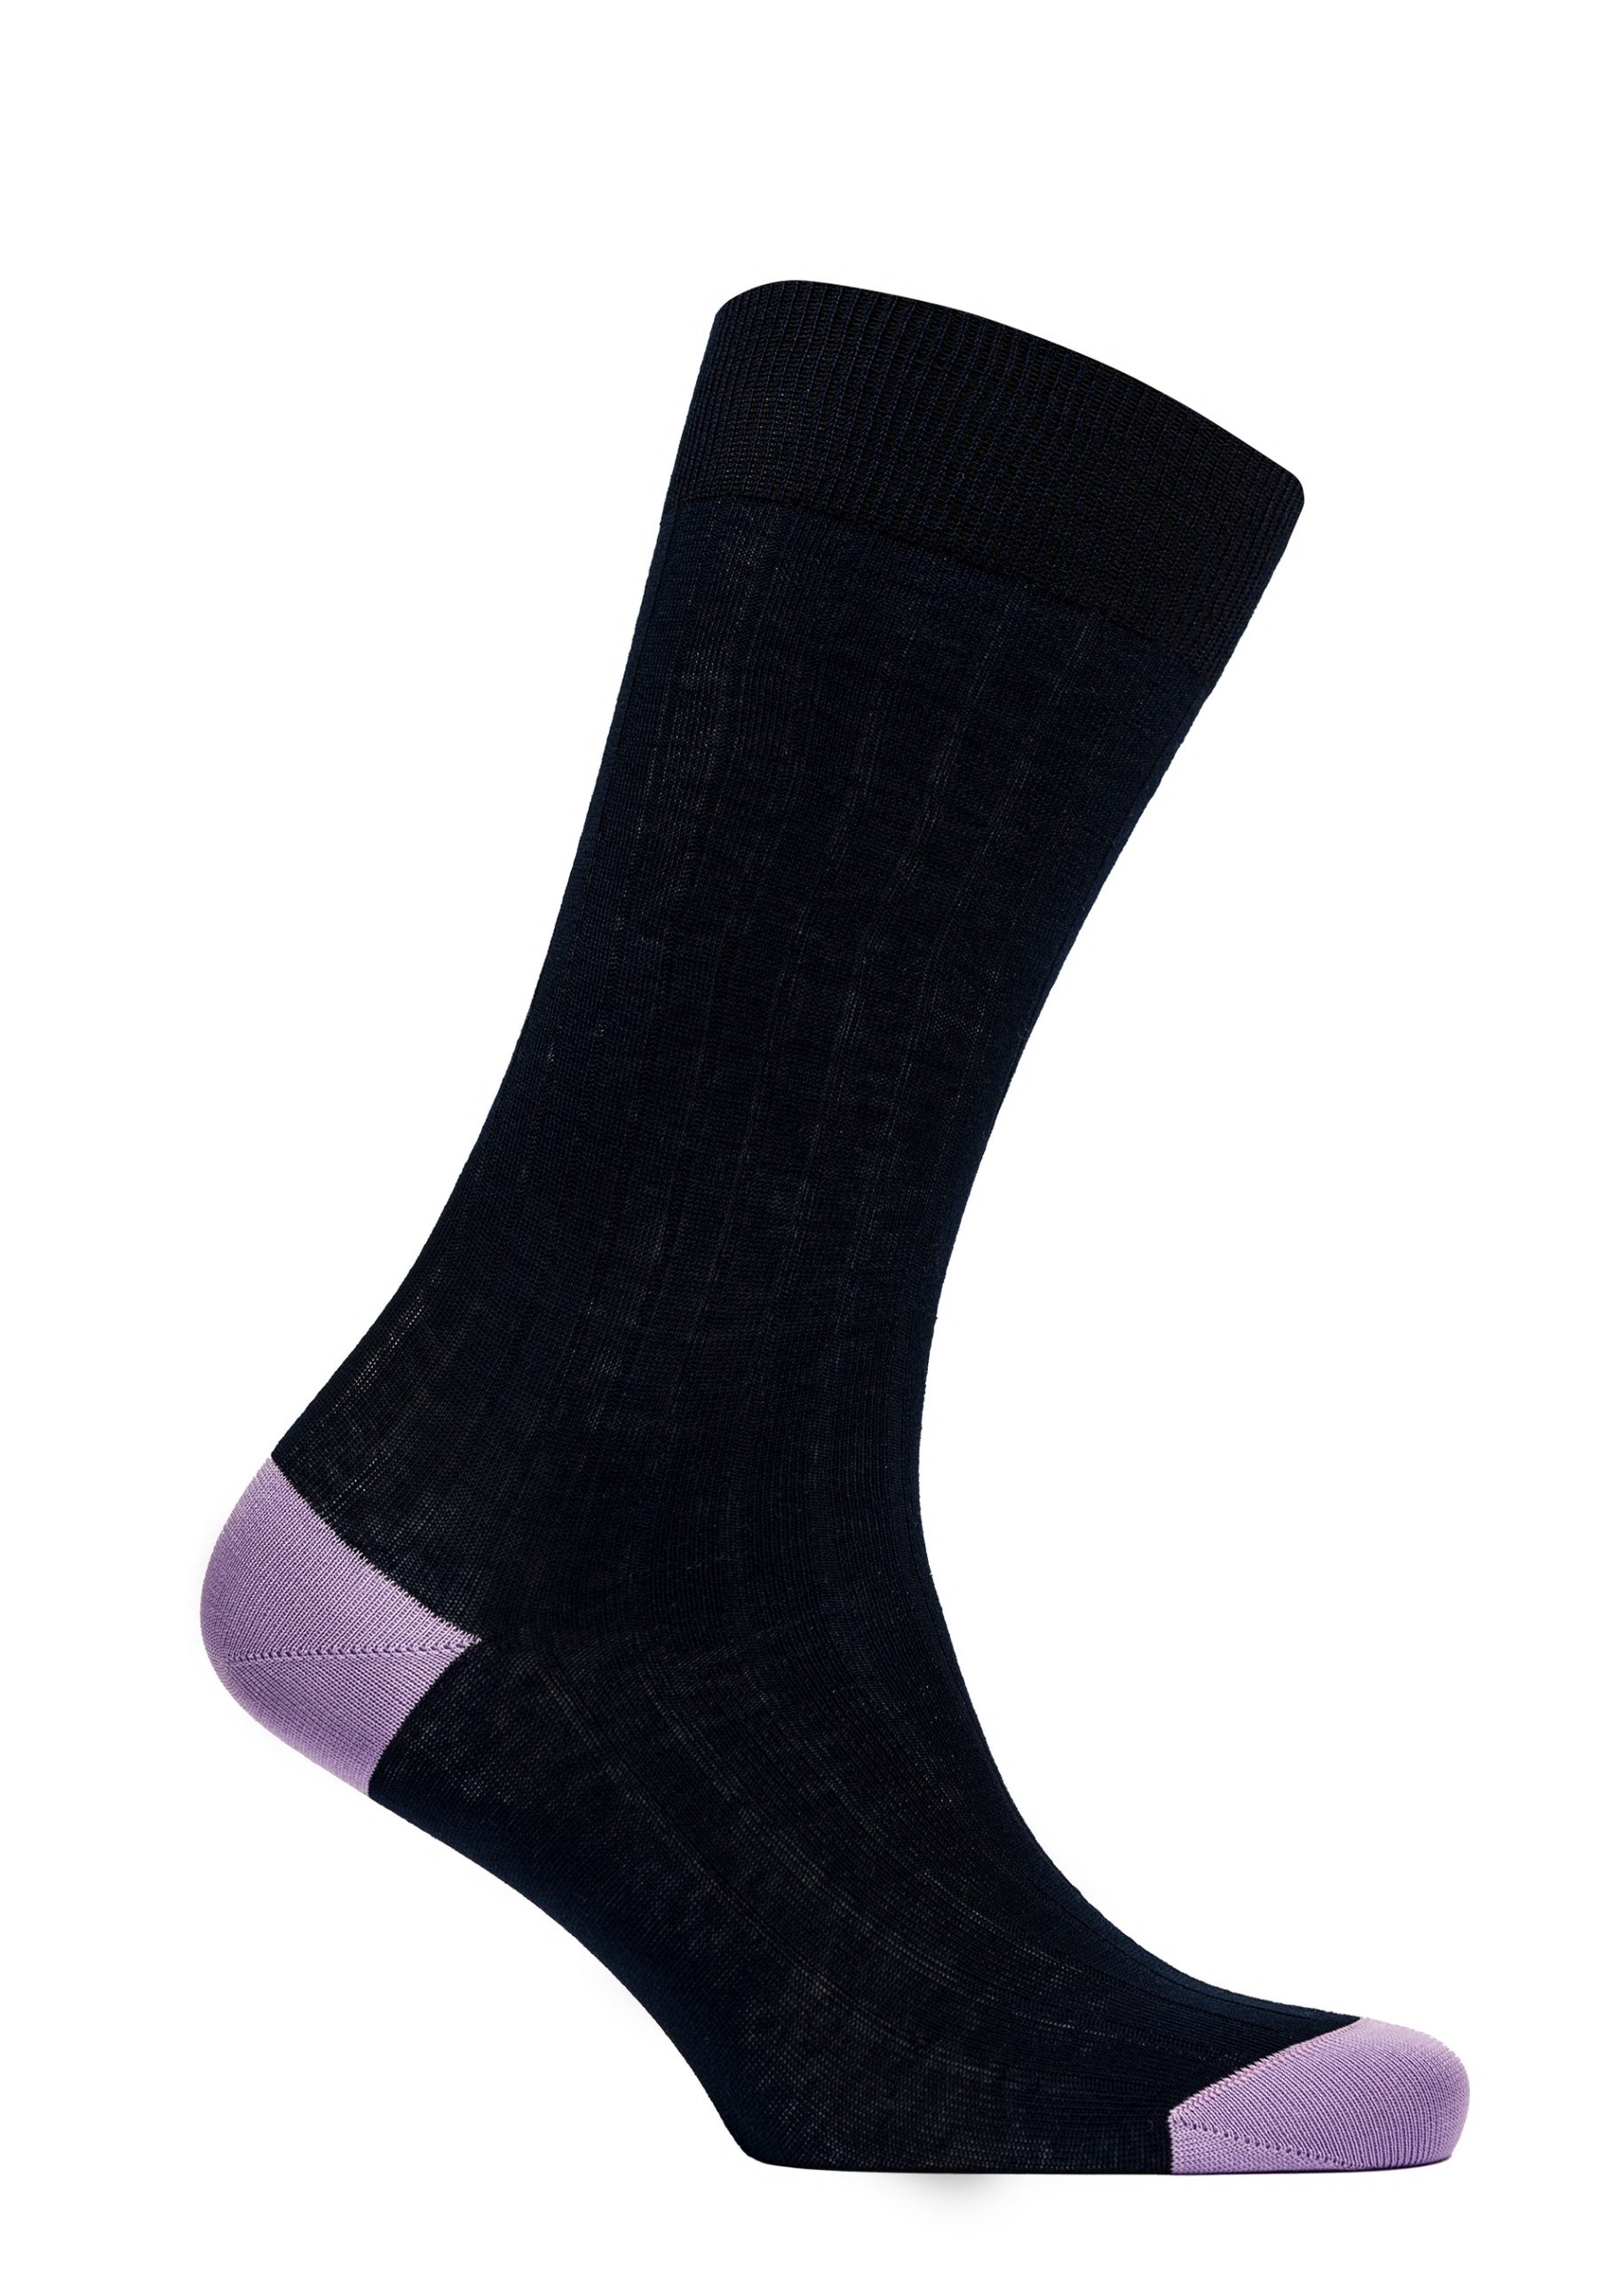 Men’s lilac and navy cotton socks by Roderick Charles